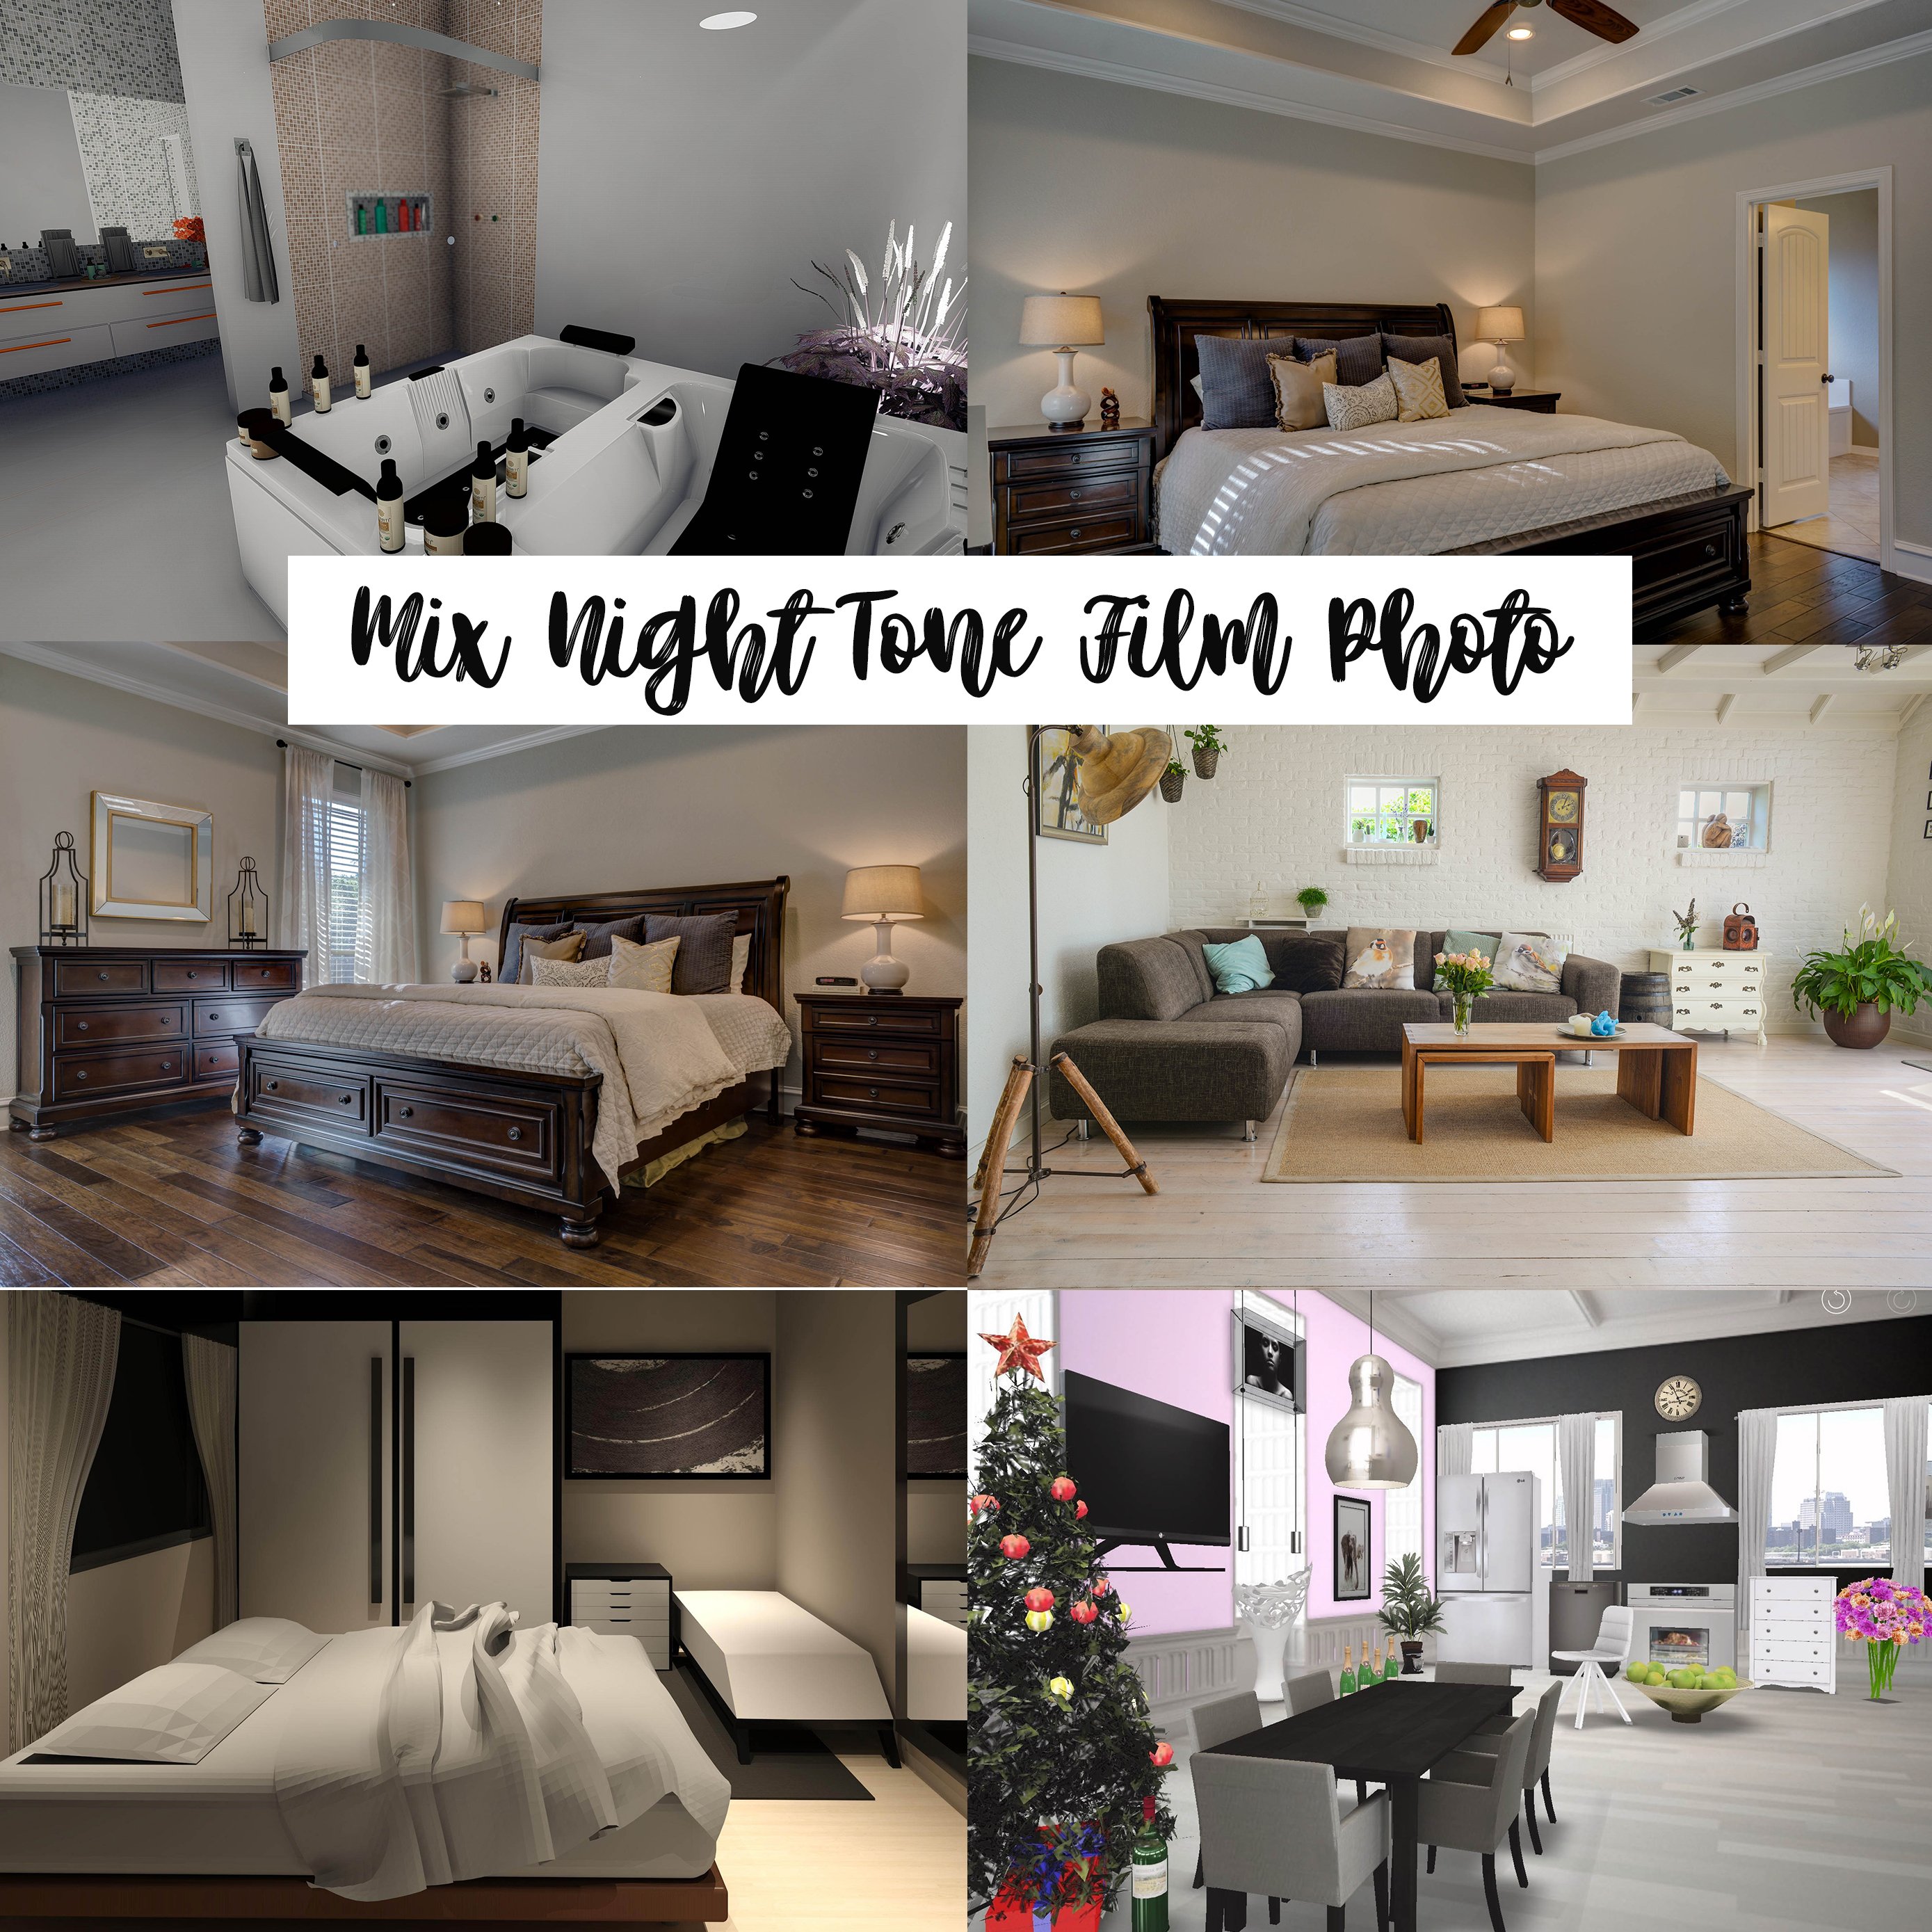 interior lightroom and photoshop presets by pixelspic mix night tone film photo before 527